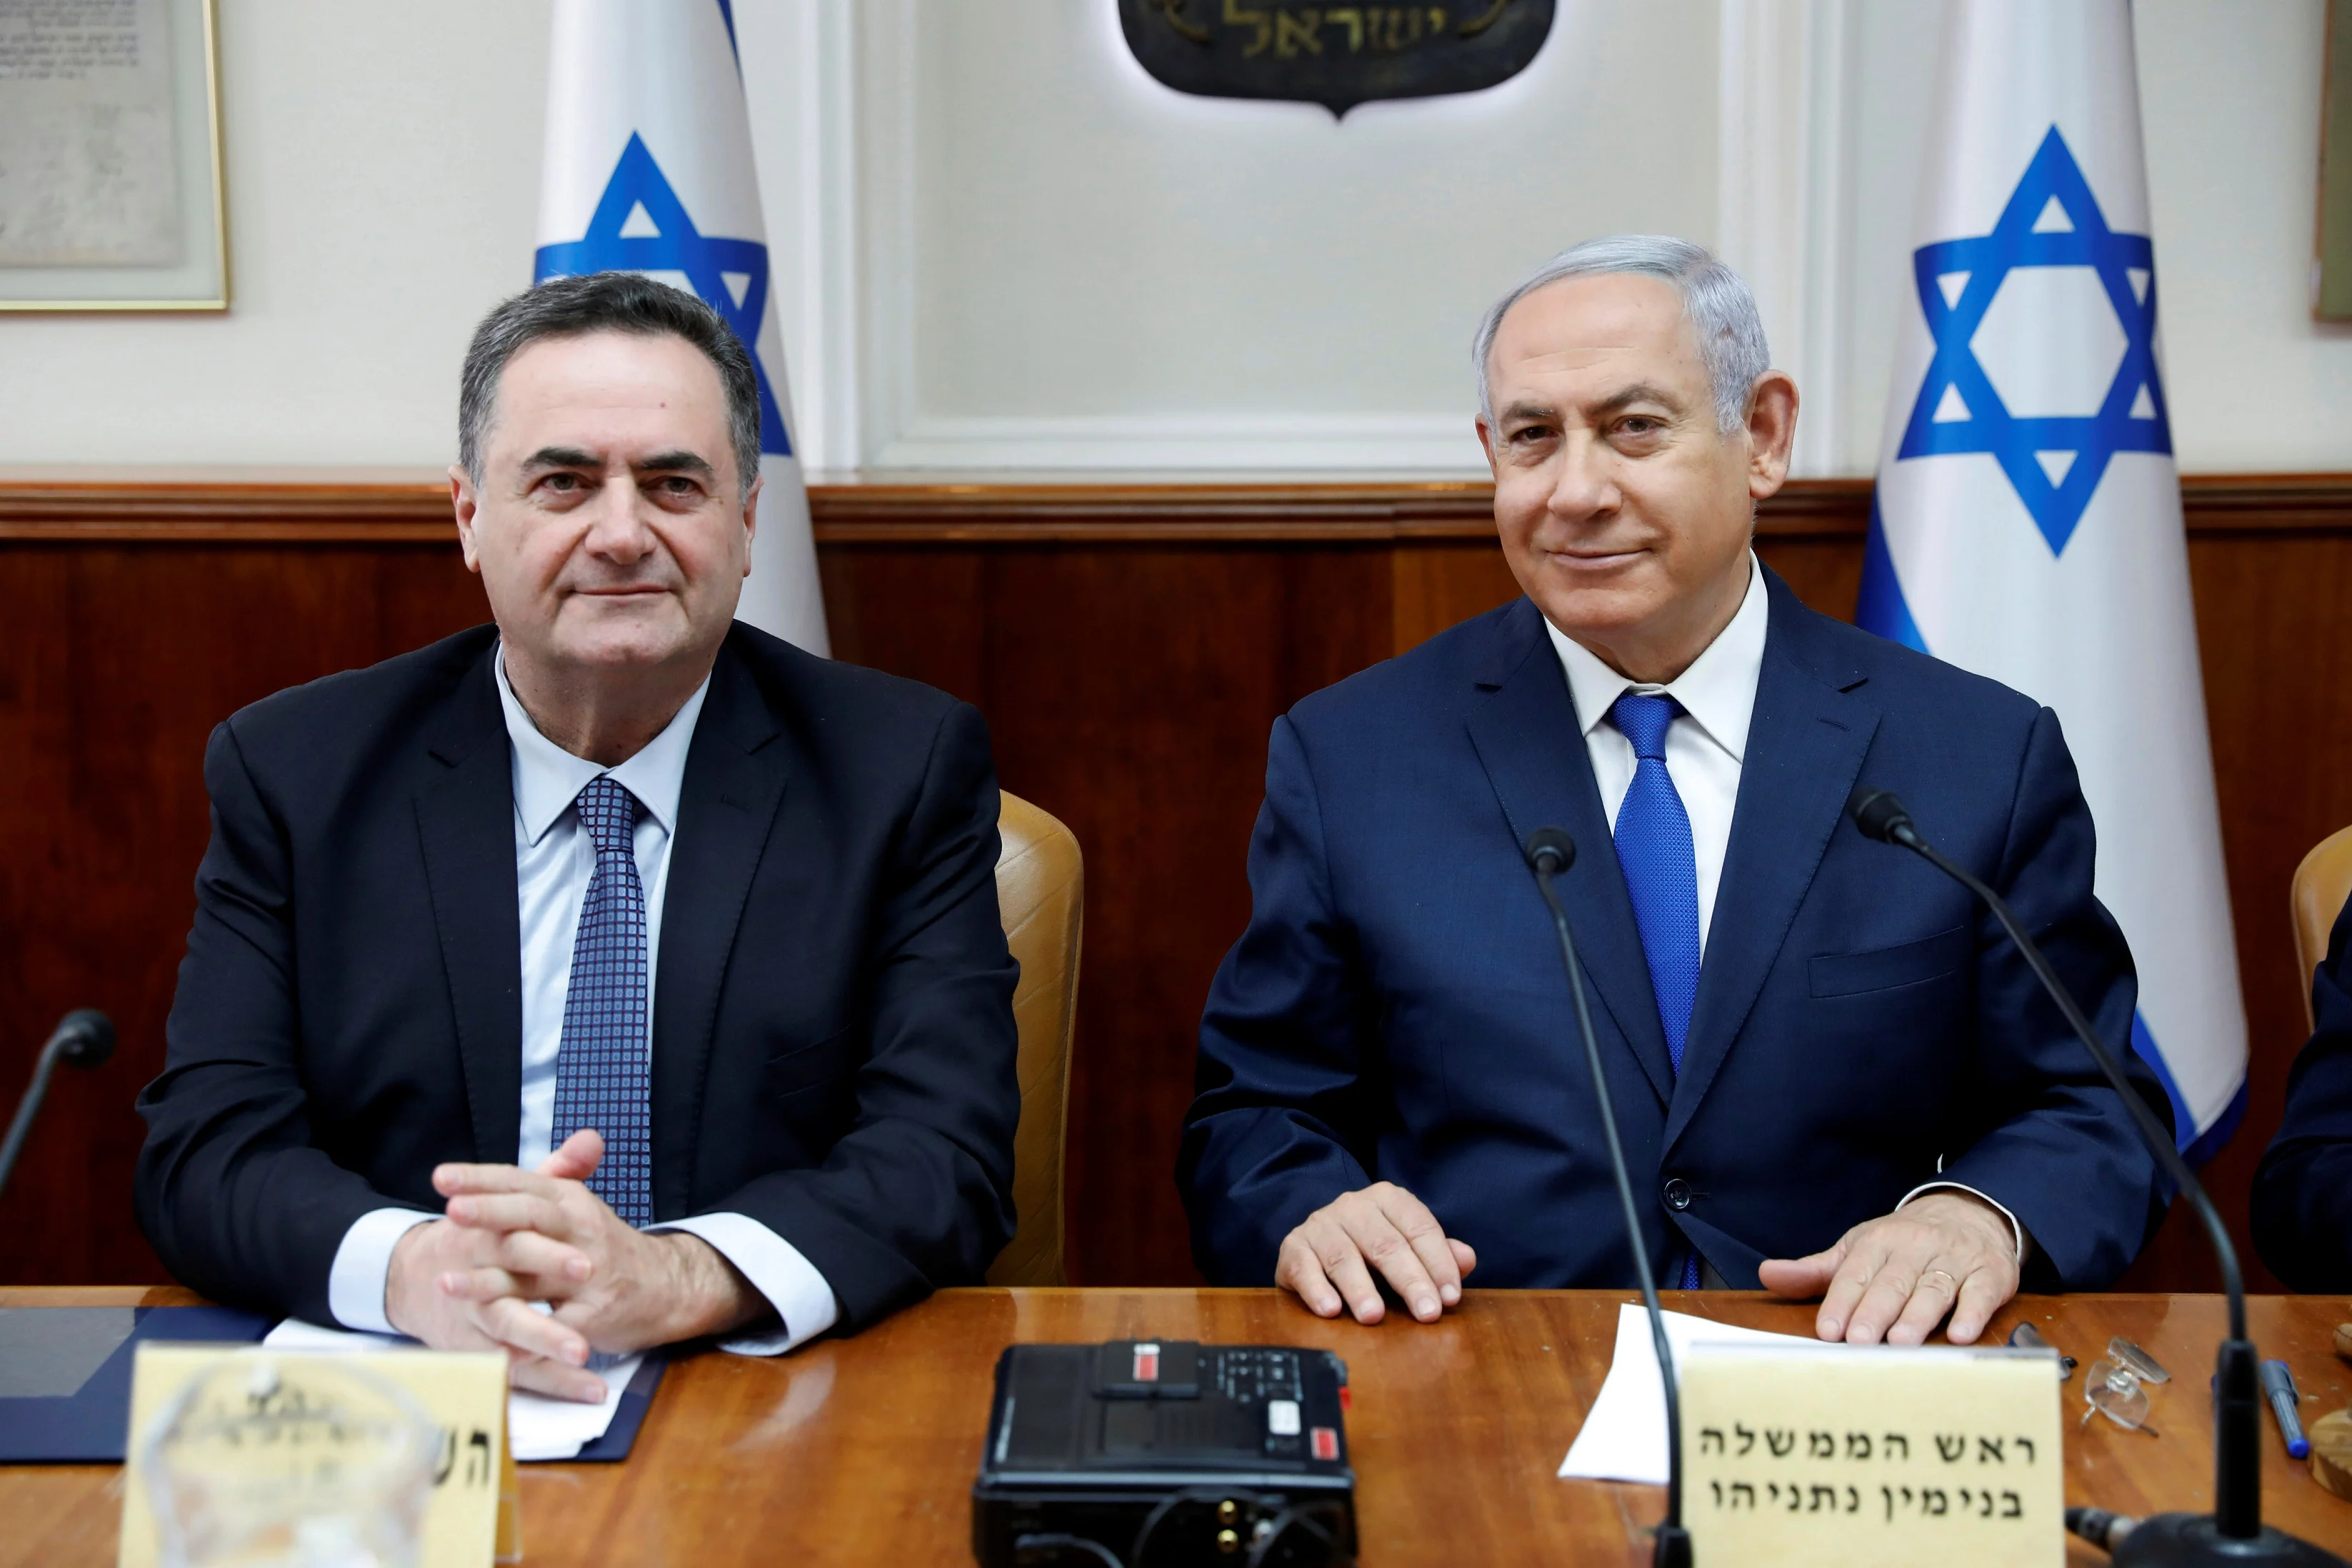 Israeli Prime Minister Benjamin Netanyahu Sits Next To Acting Foreign Minister Israel Katz, Who Also Serves As Intelligence And Transport Minister, During The Weekly Cabinet Meeting In Jerusalem